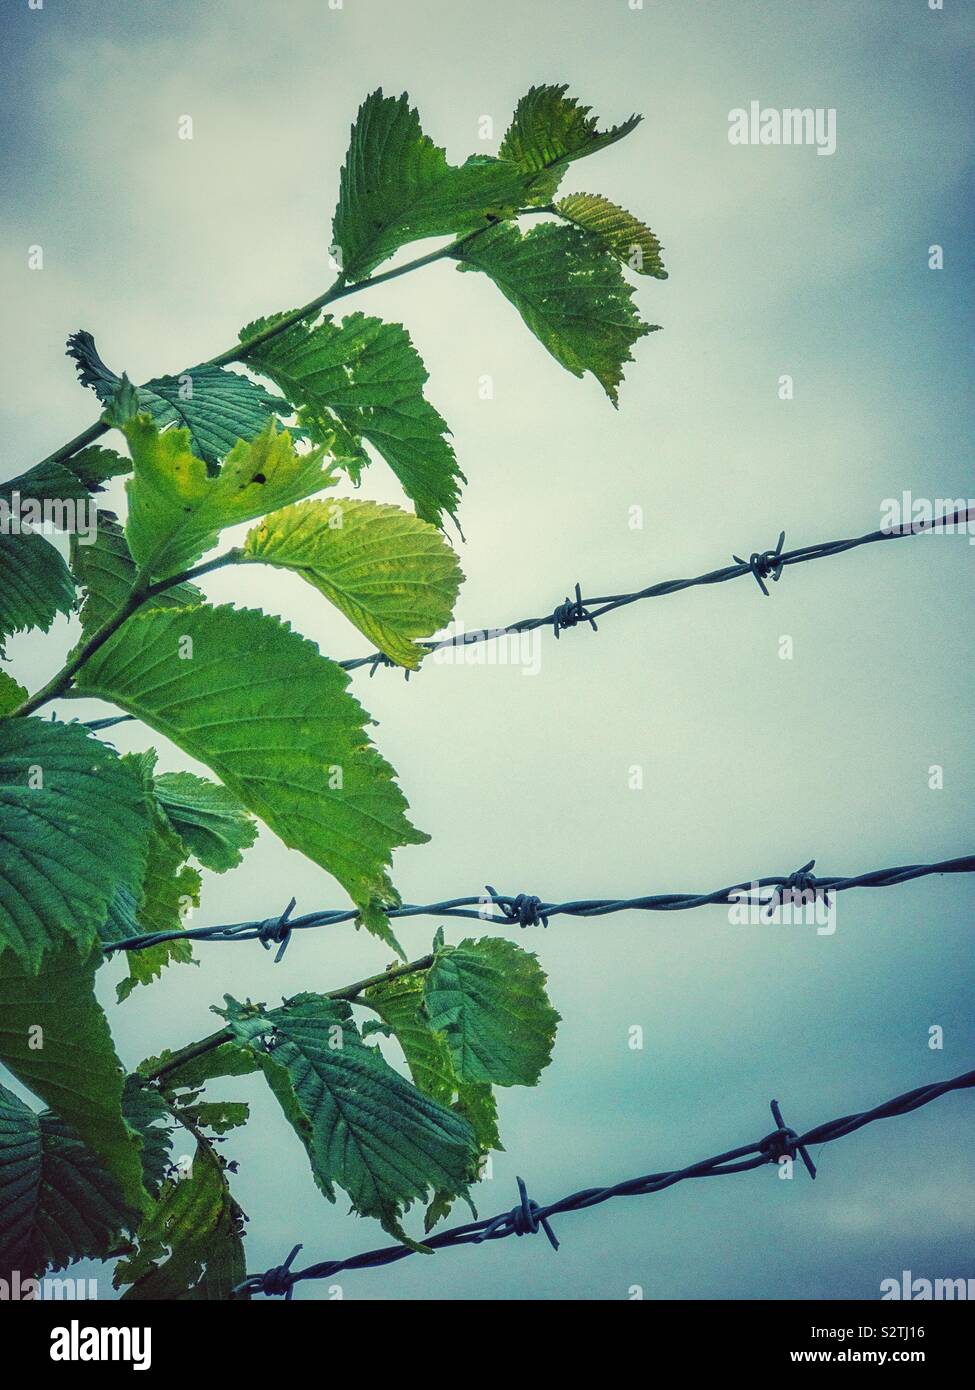 Tree leaves and barbed wire against a cloudy sky. Stock Photo